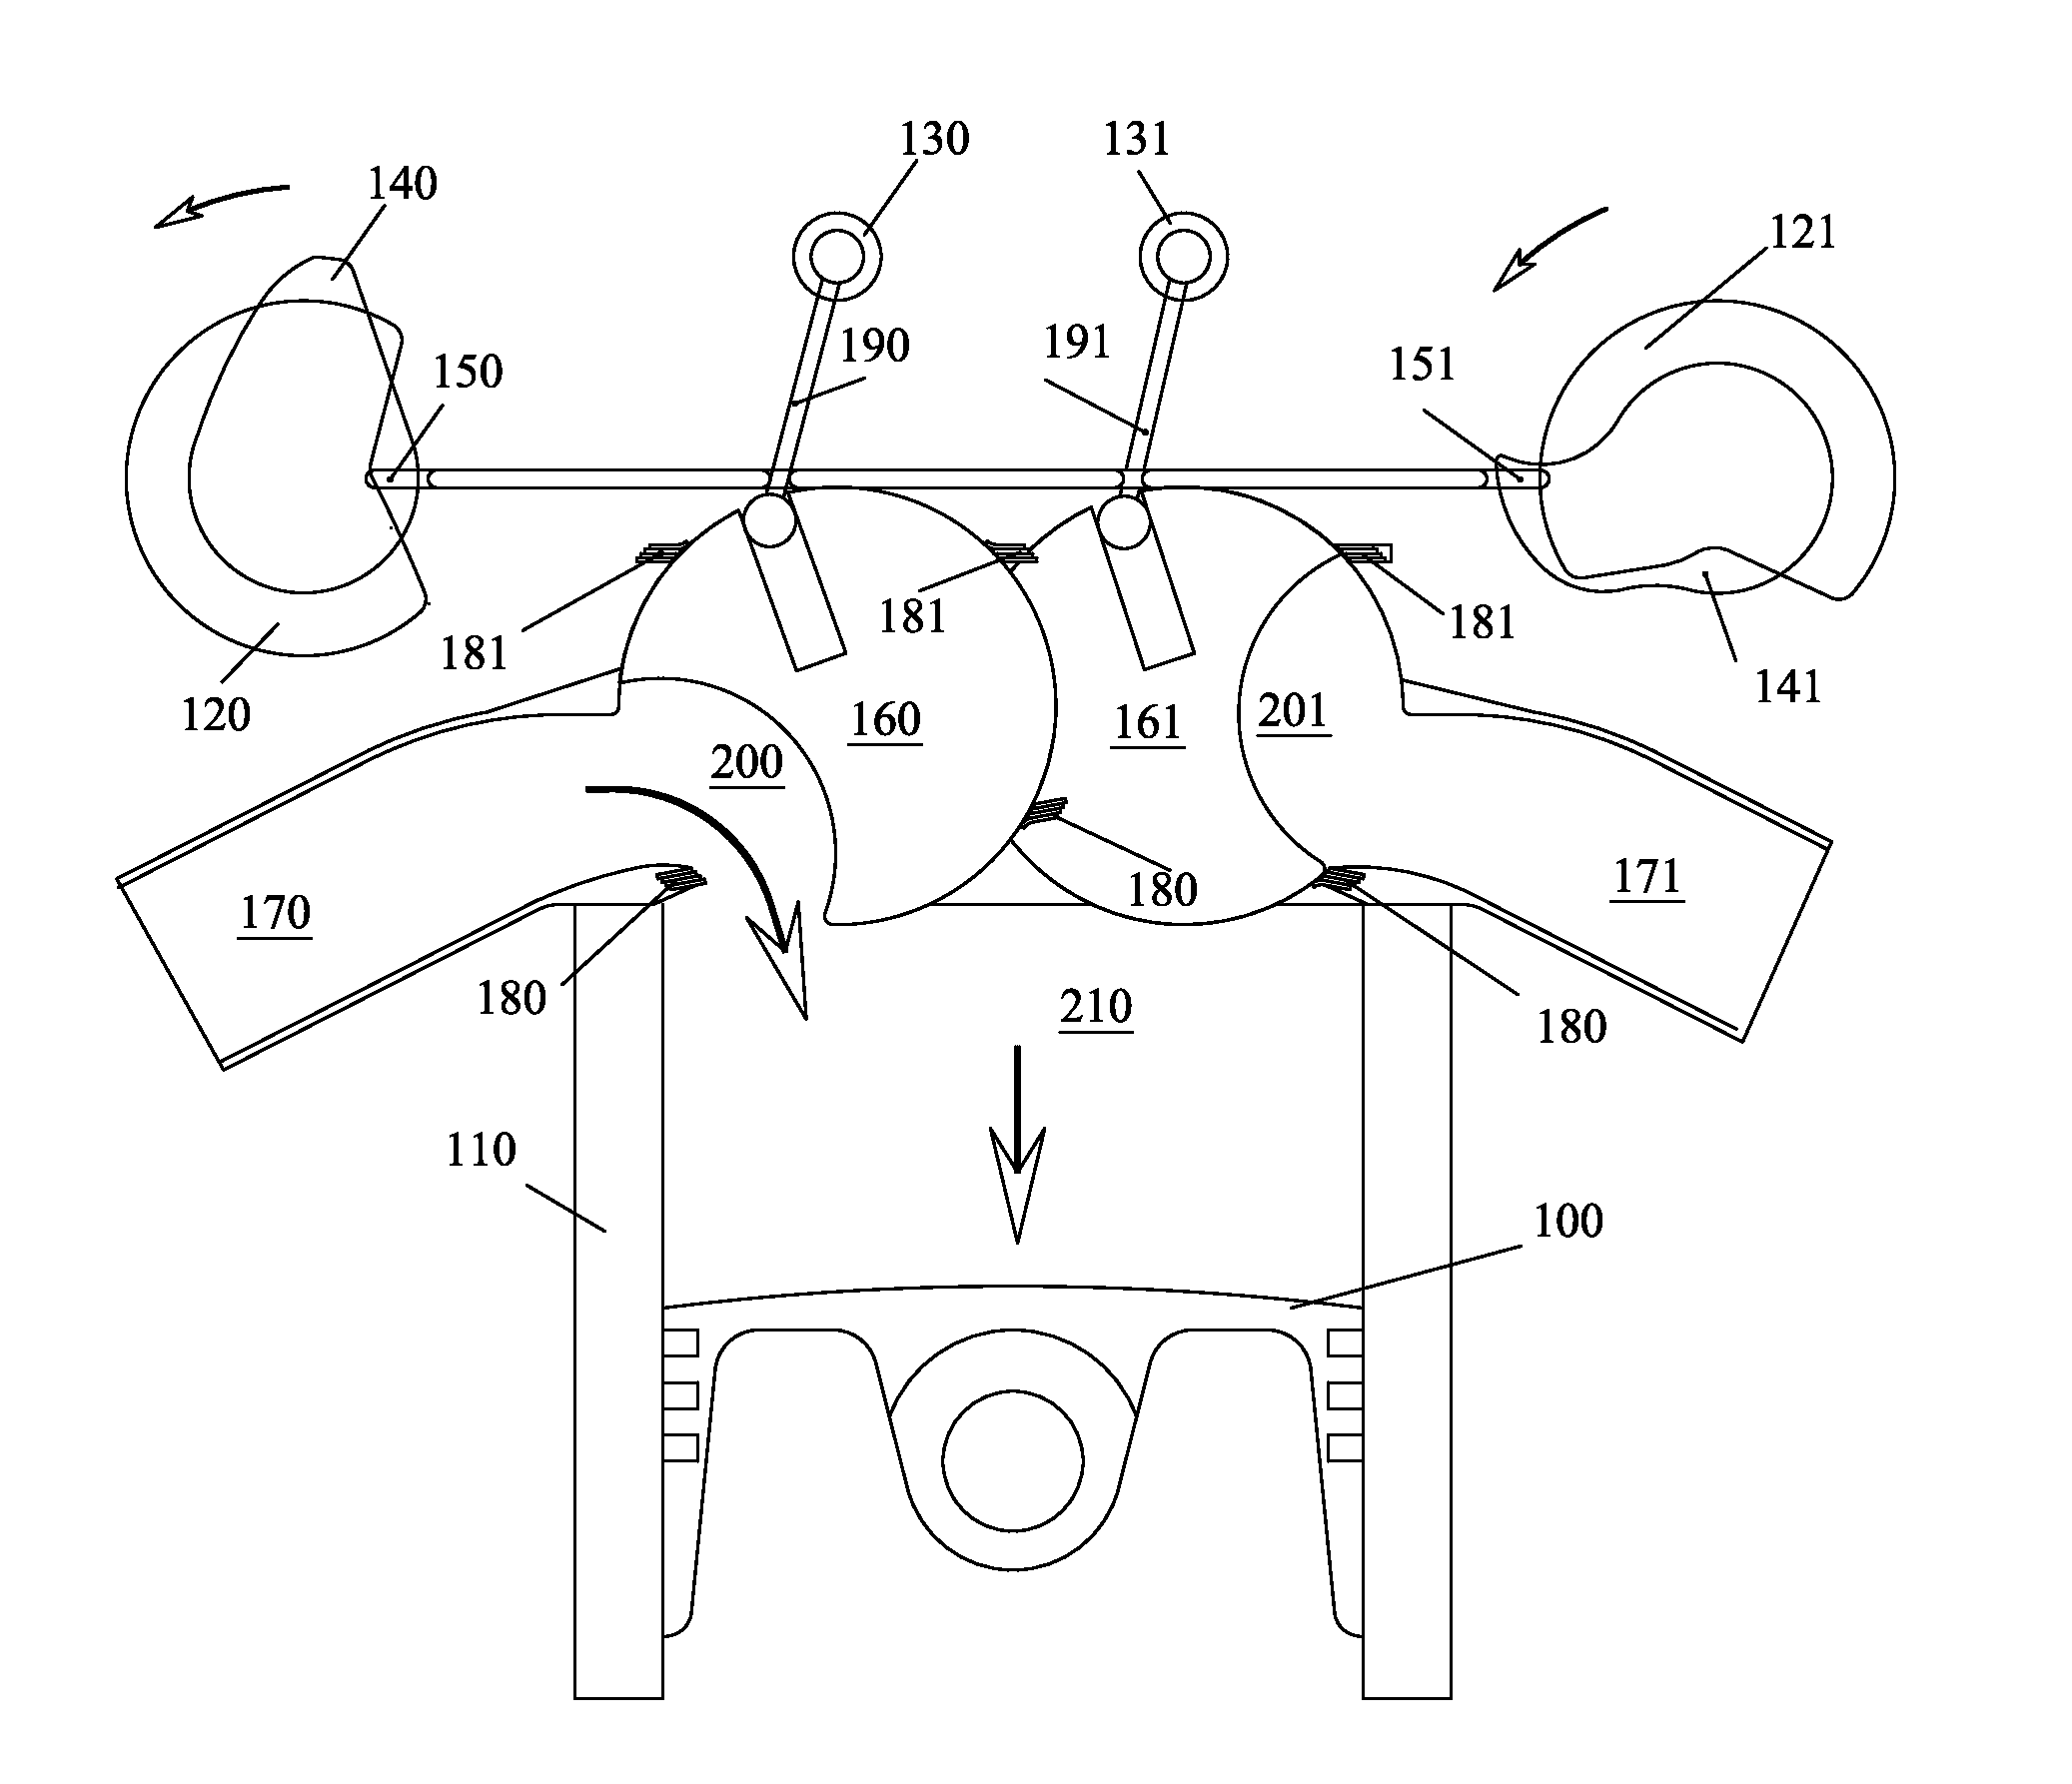 Internal combustion engine with direct air injection and pivoting valve